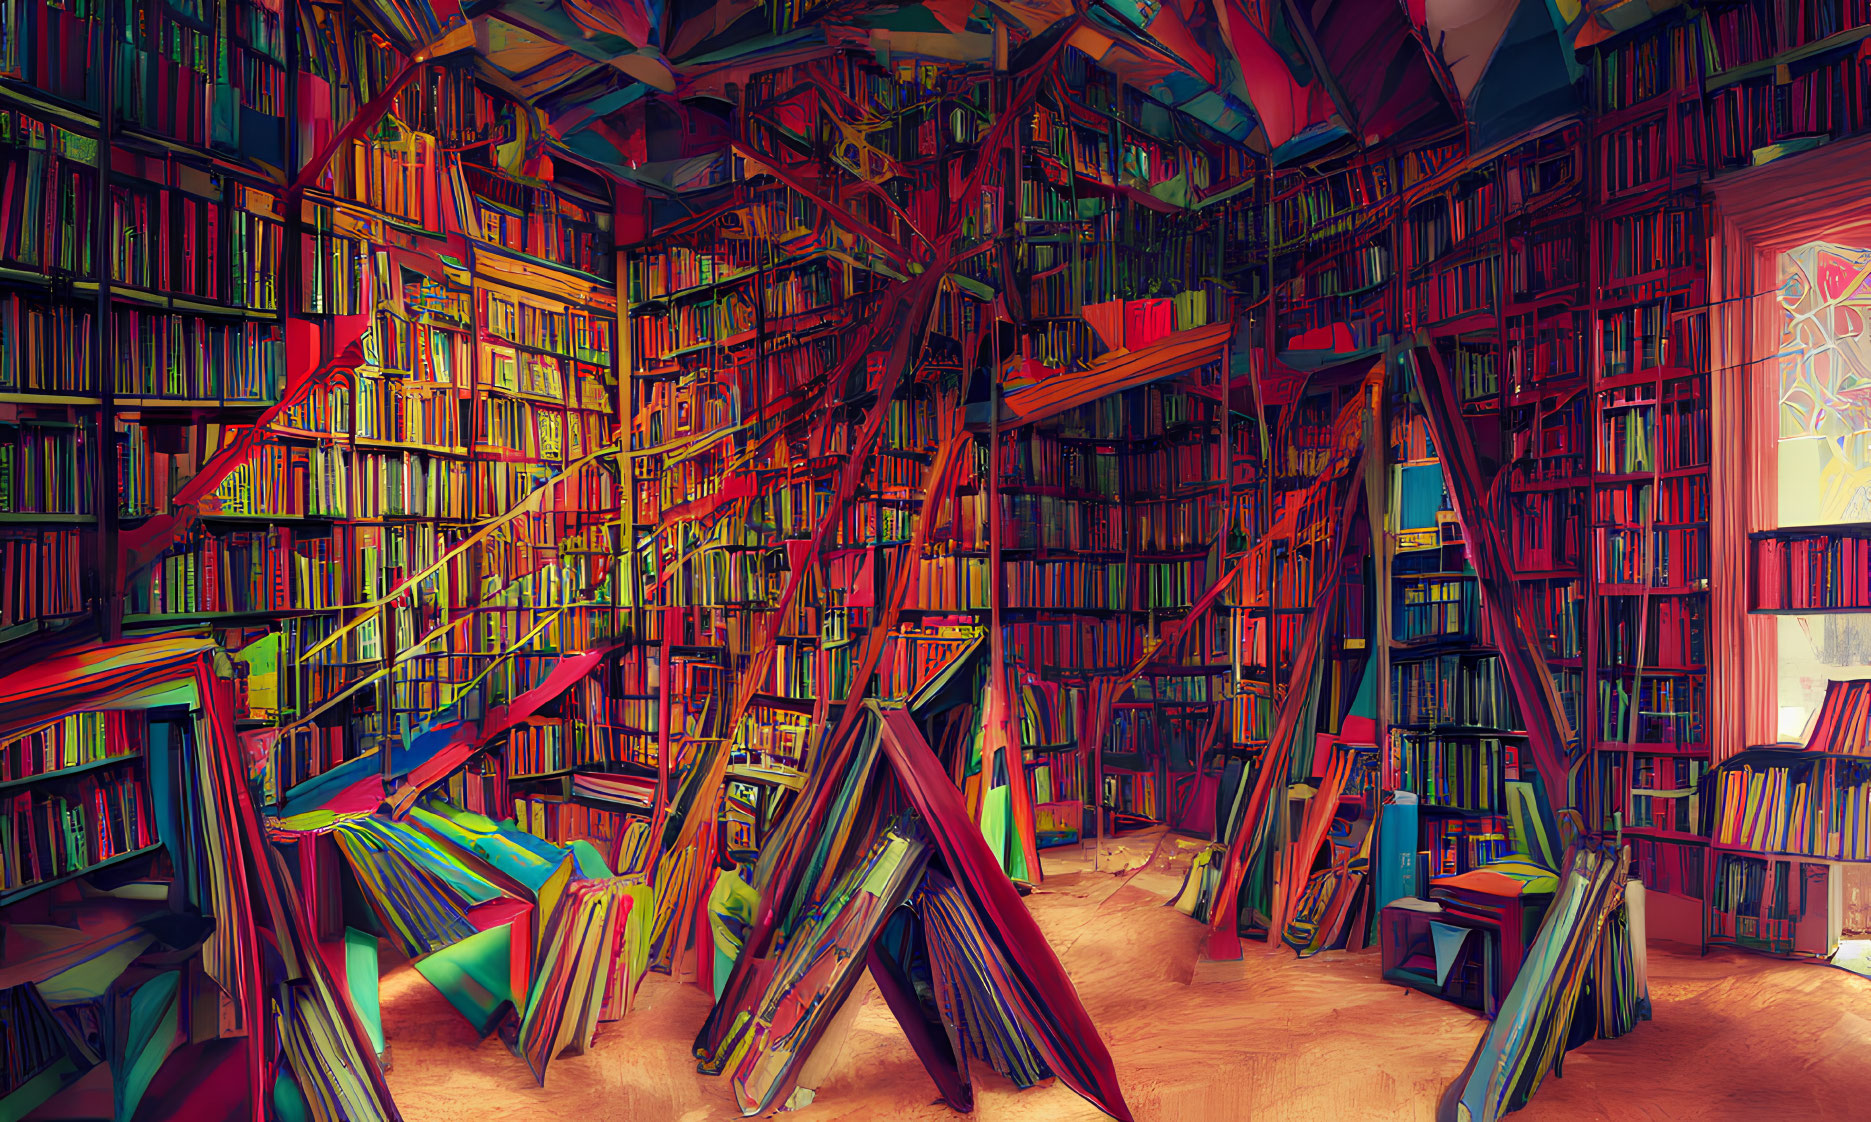 Chaotic library with haphazardly arranged books and ladders in vibrant room